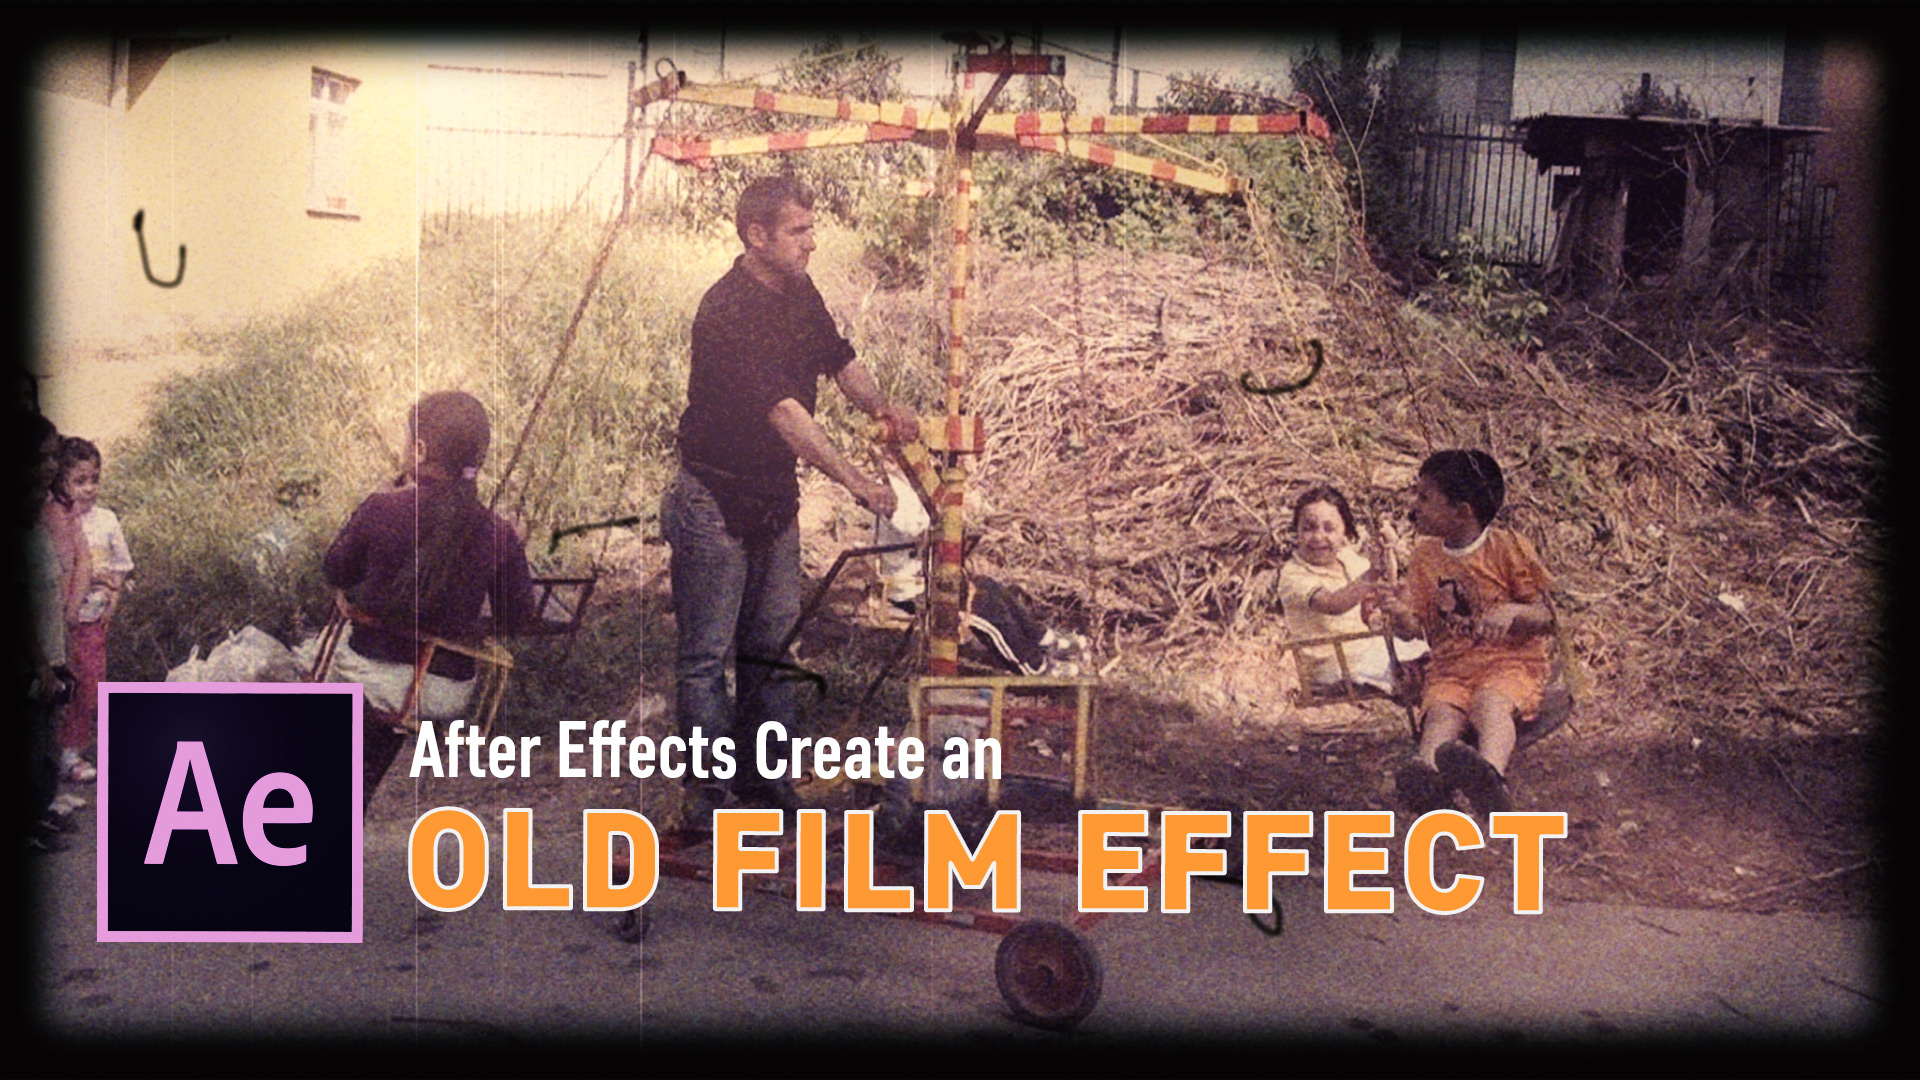 After Effects Old Film Effect